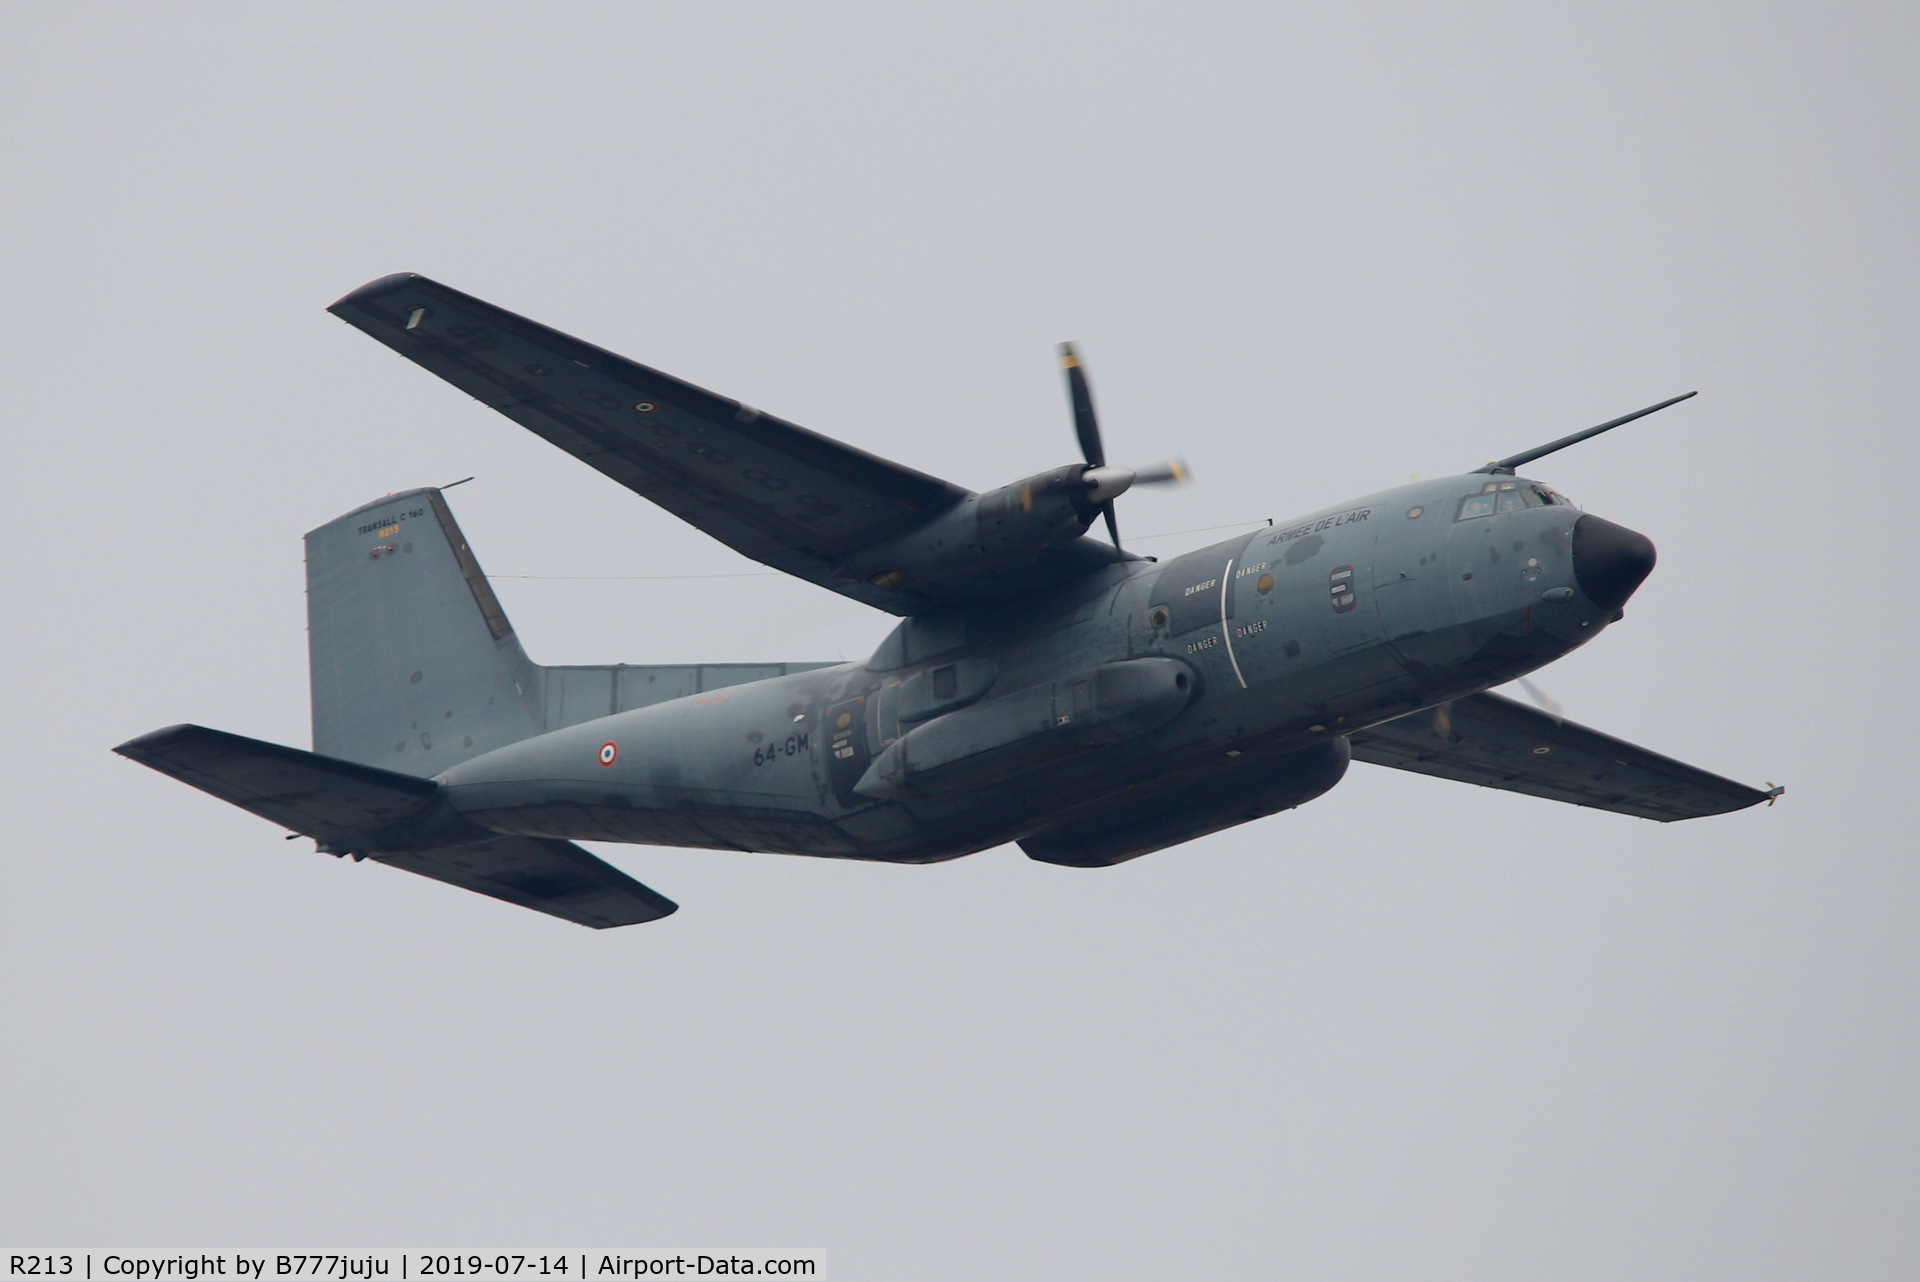 R213, Transall C-160R C/N 216, during French Parade over Paris